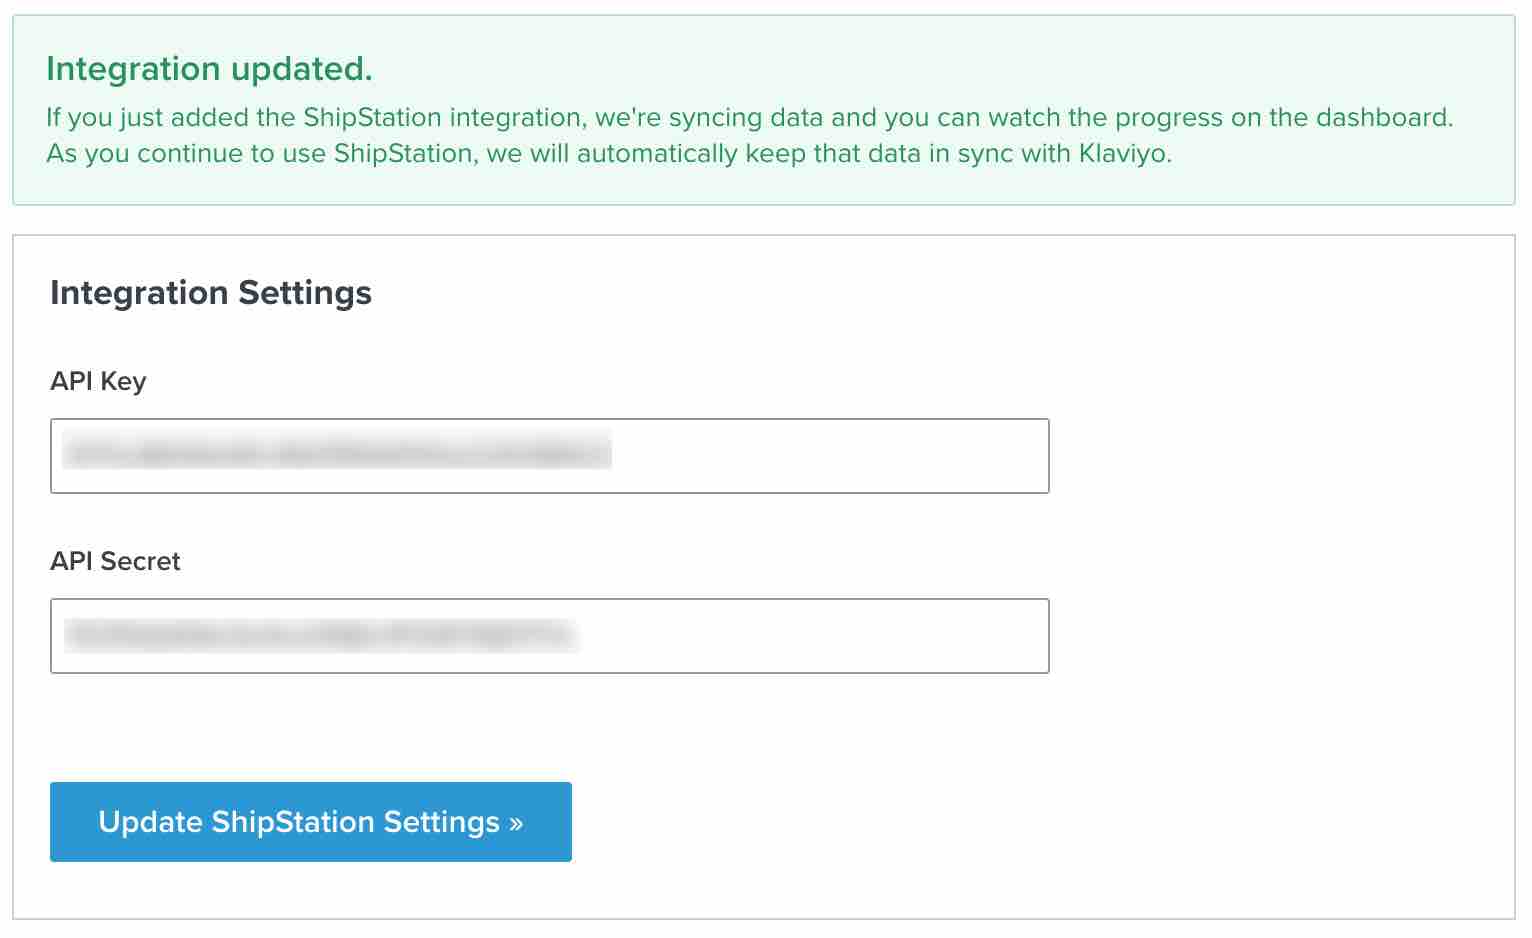 ShipStation integration settings page in Klaviyo with green Integration updated success callout